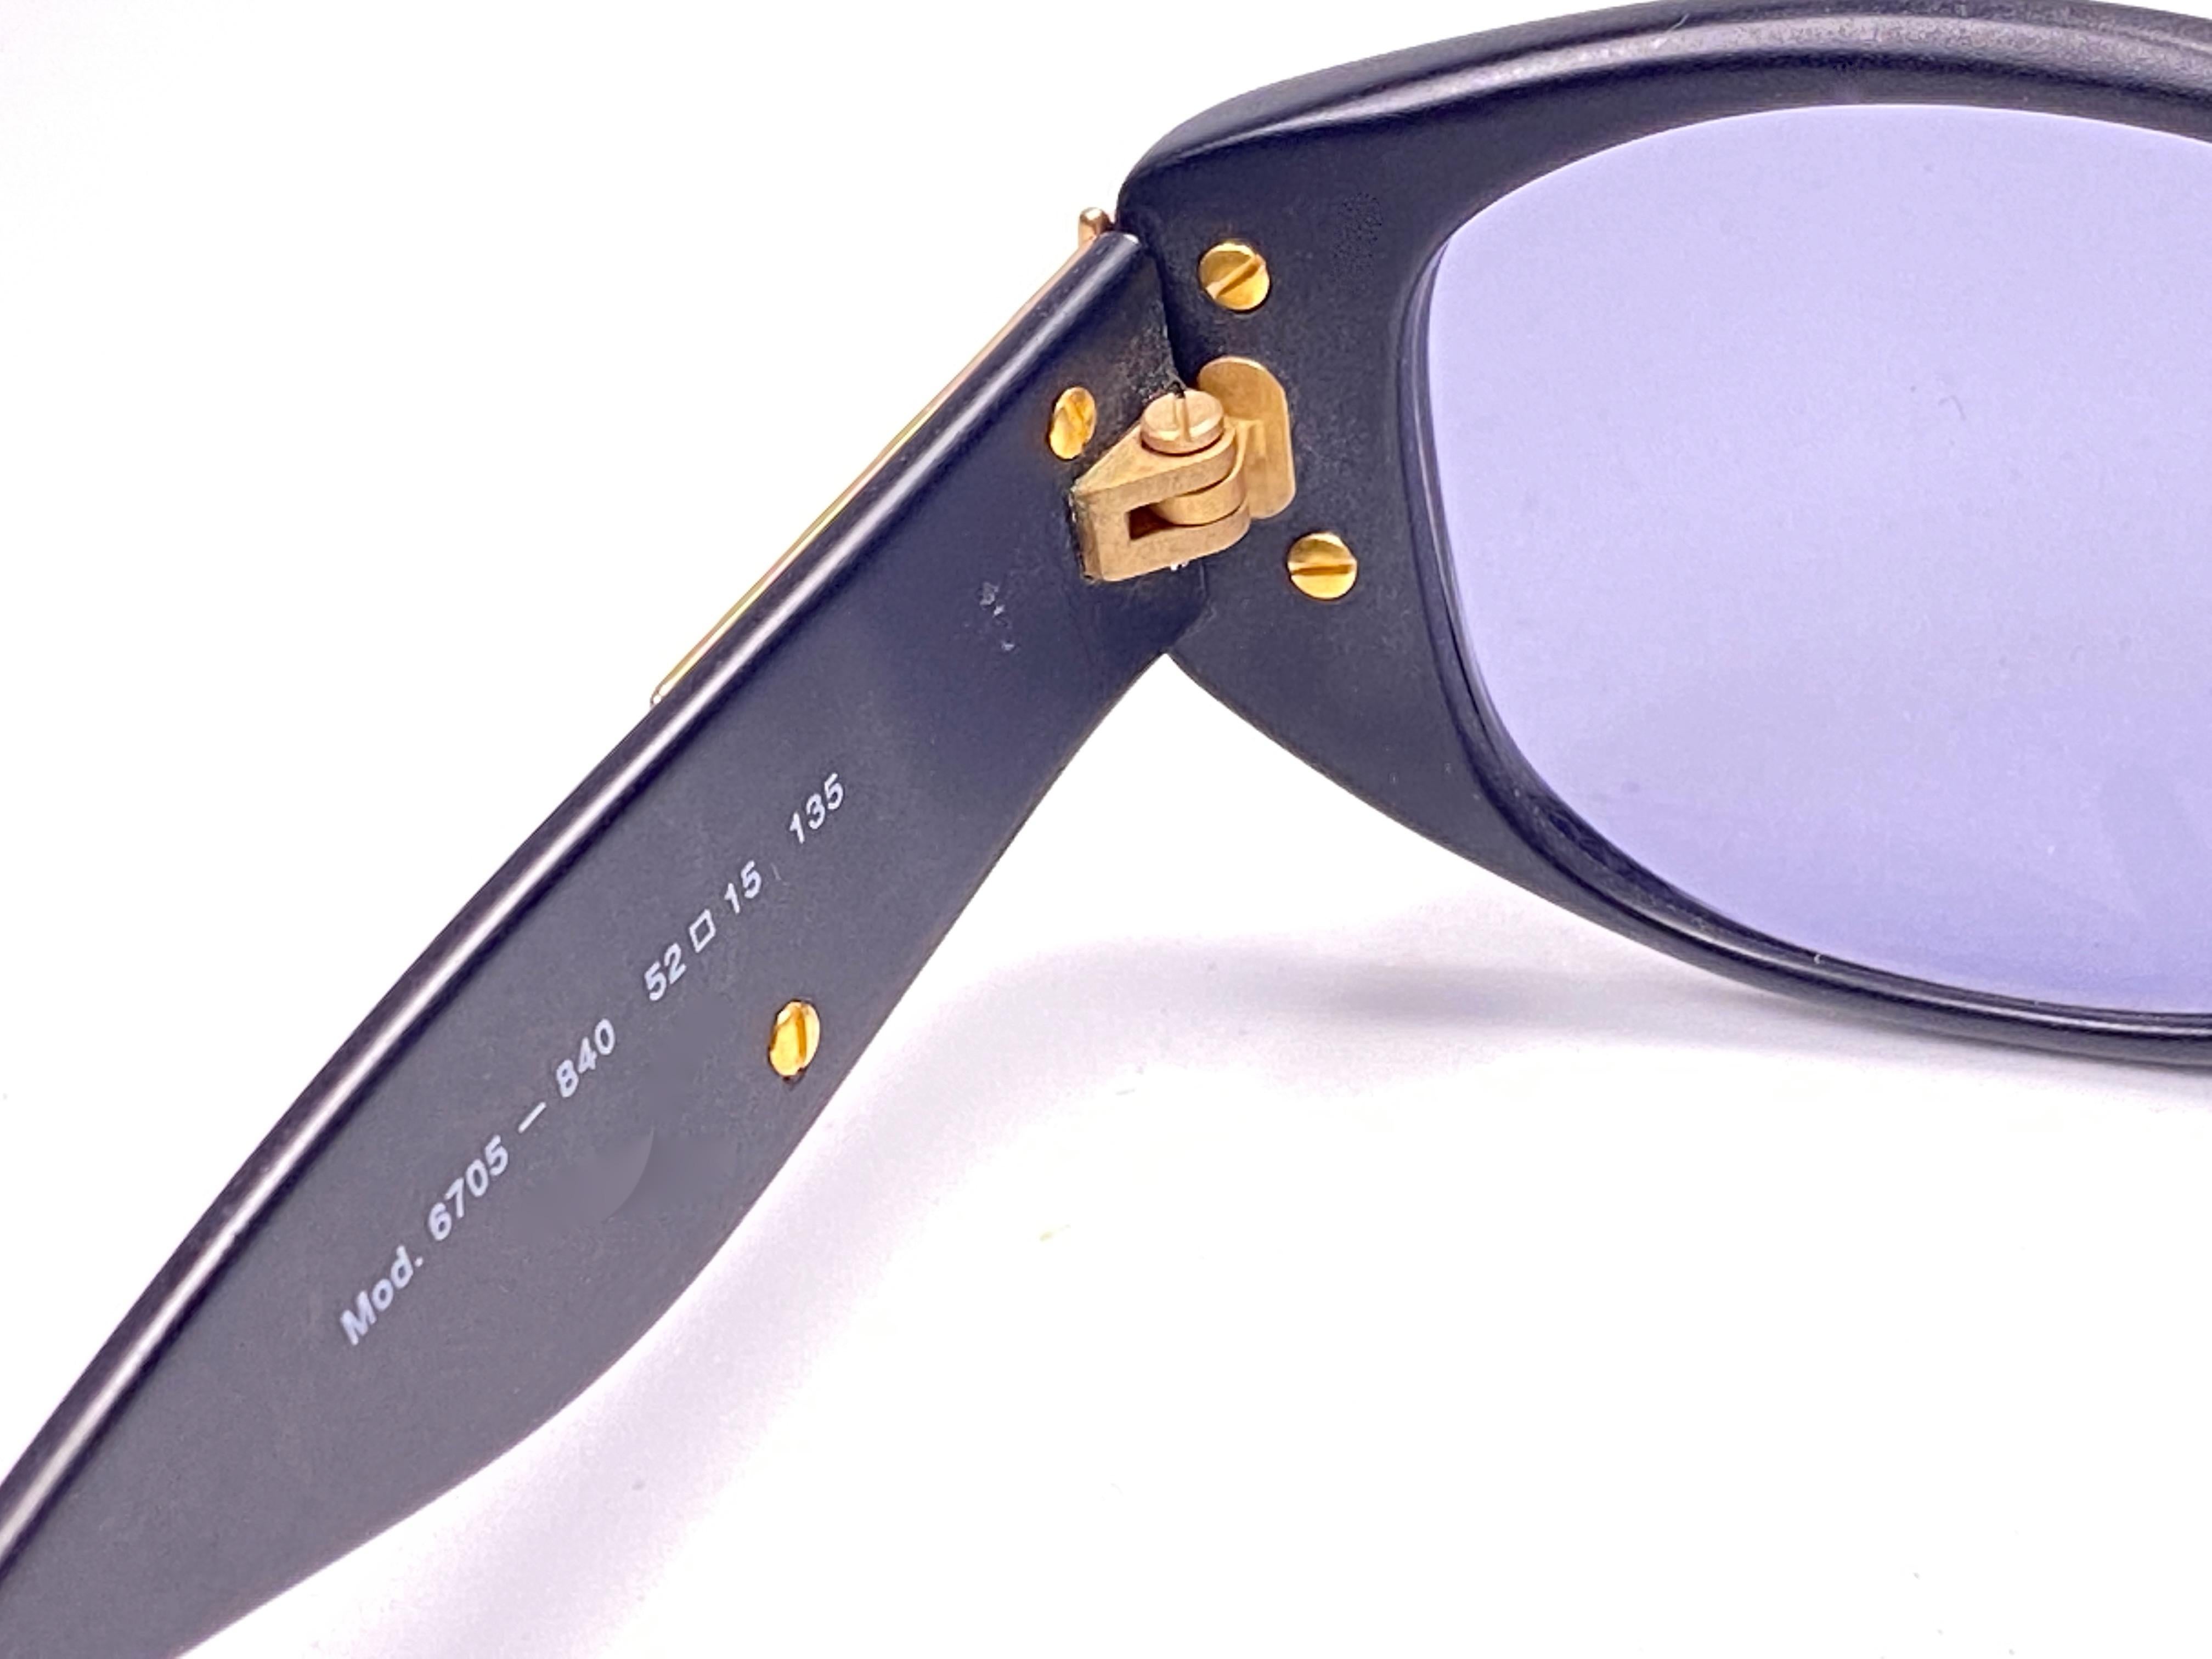 Rare pair of New vintage Christian Lacroix sunglasses.   

Black & gold frame holding a pair of spotless medium grey lenses. 

New, never worn or displayed. 
This item may show minor sign of wear due to storage.
Made in France.